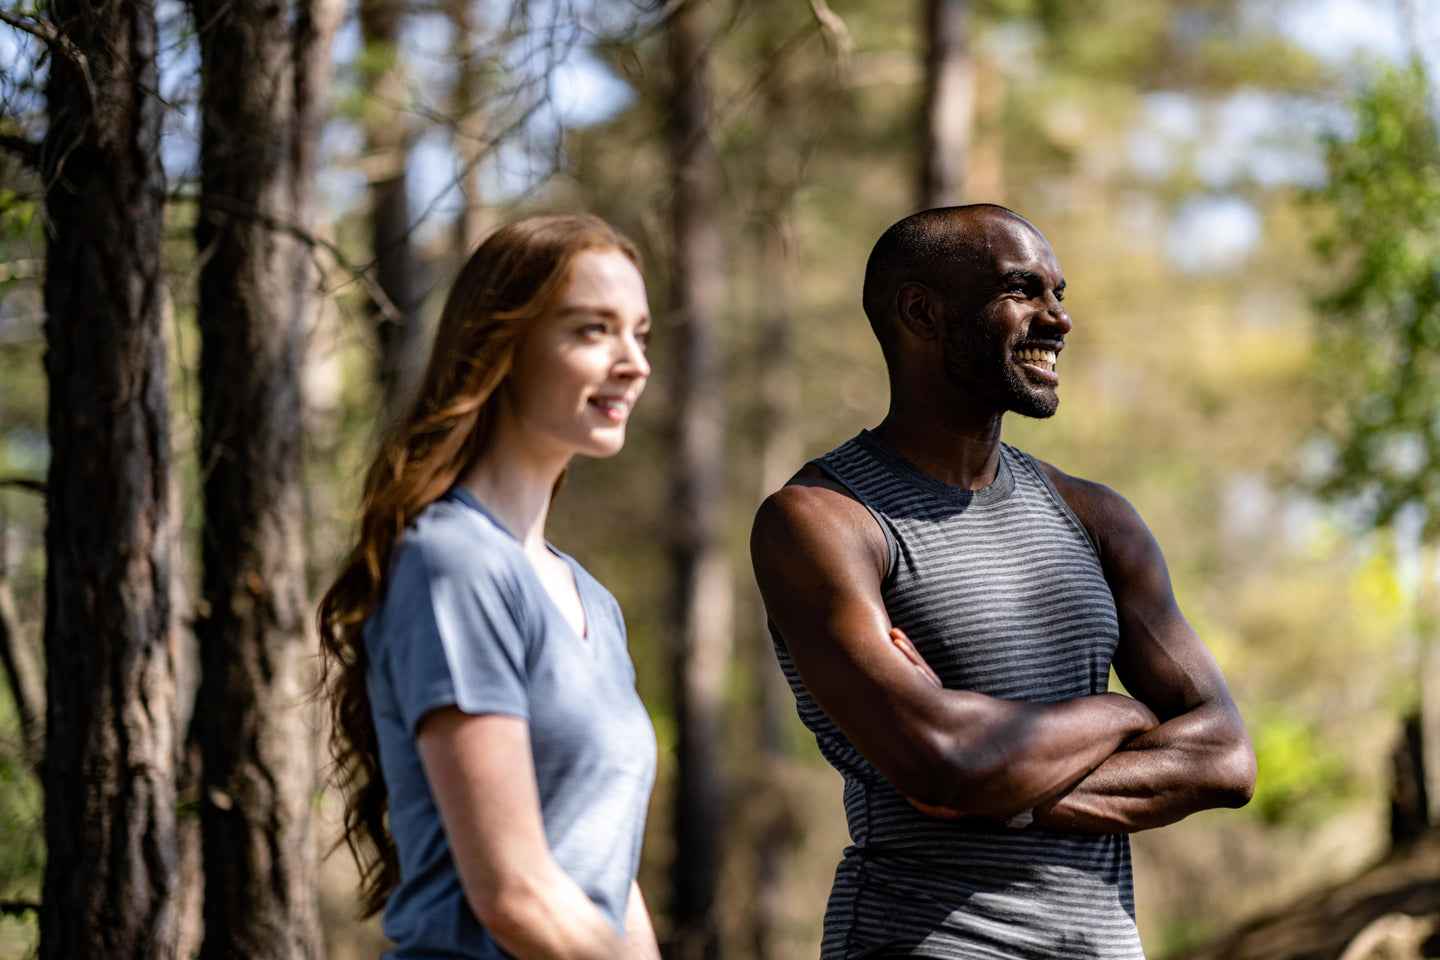 Man and woman outdoors in a wooded area, man in an Isobaa merino sleeveless top, woman in a light blue t-shirt